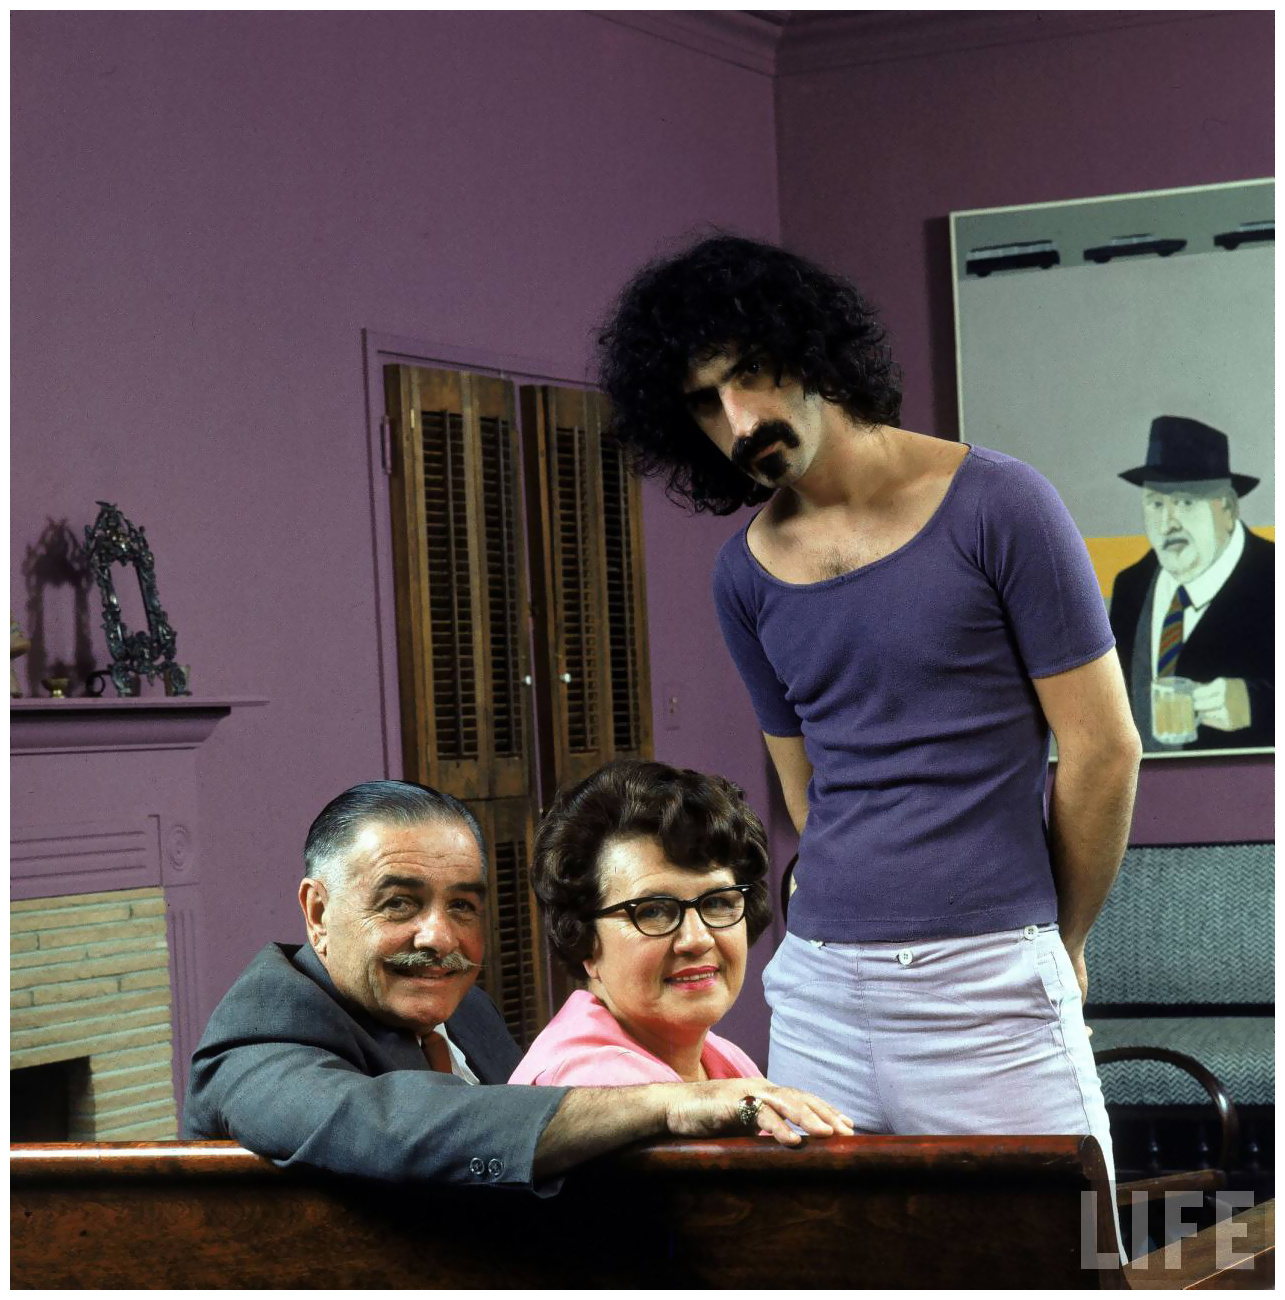 rock-musician-frank-zappa-w-hs-parents-francis-and-rosemarie-in-his-living-room